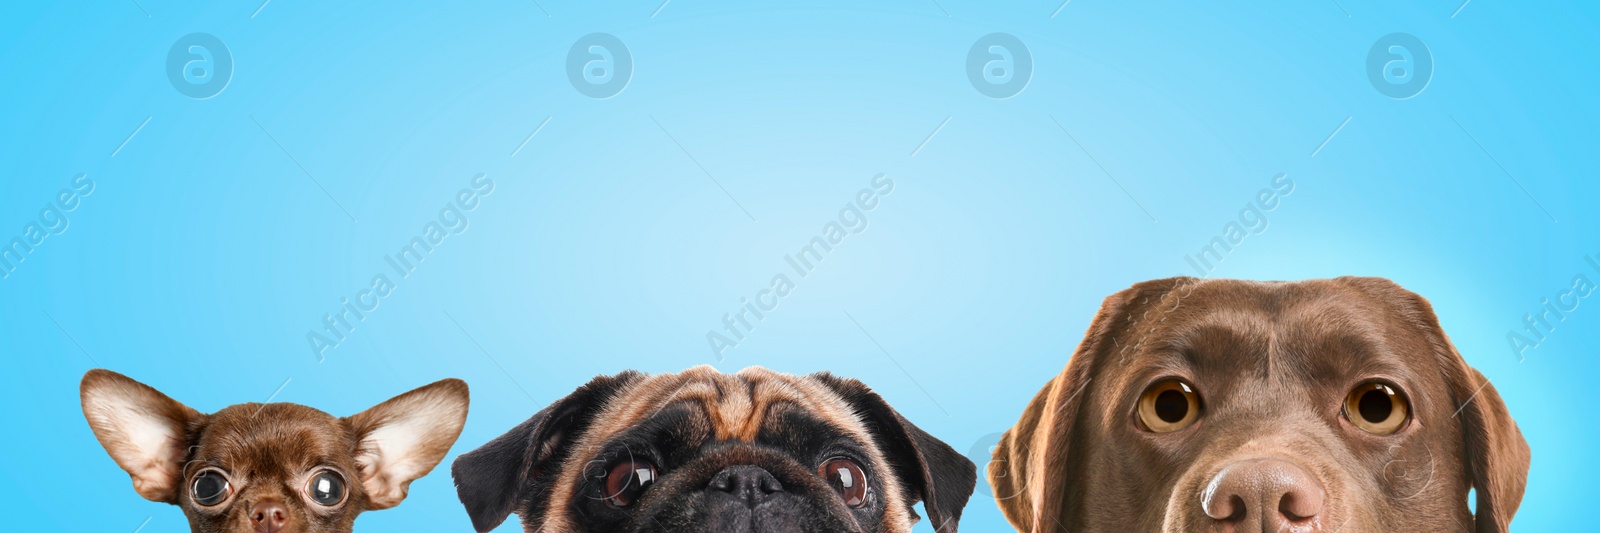 Image of Cute surprised animals on light blue background, banner design. Adorable Chihuahua, pug and labrador retriever dogs with big eyes